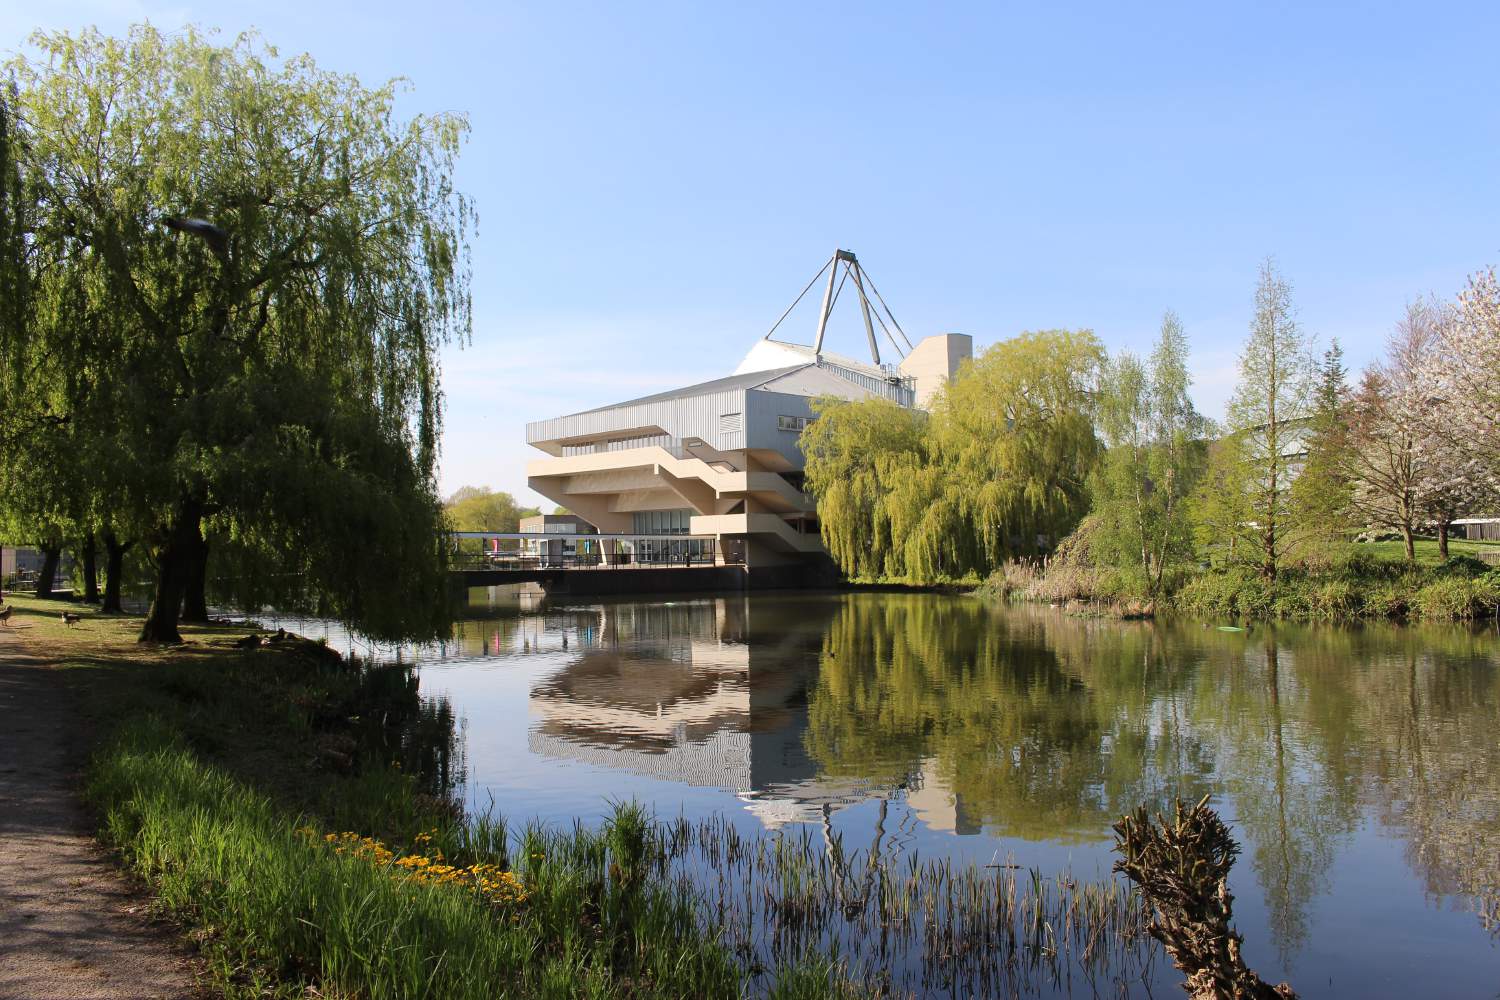 What's happening with Science at the University of York?